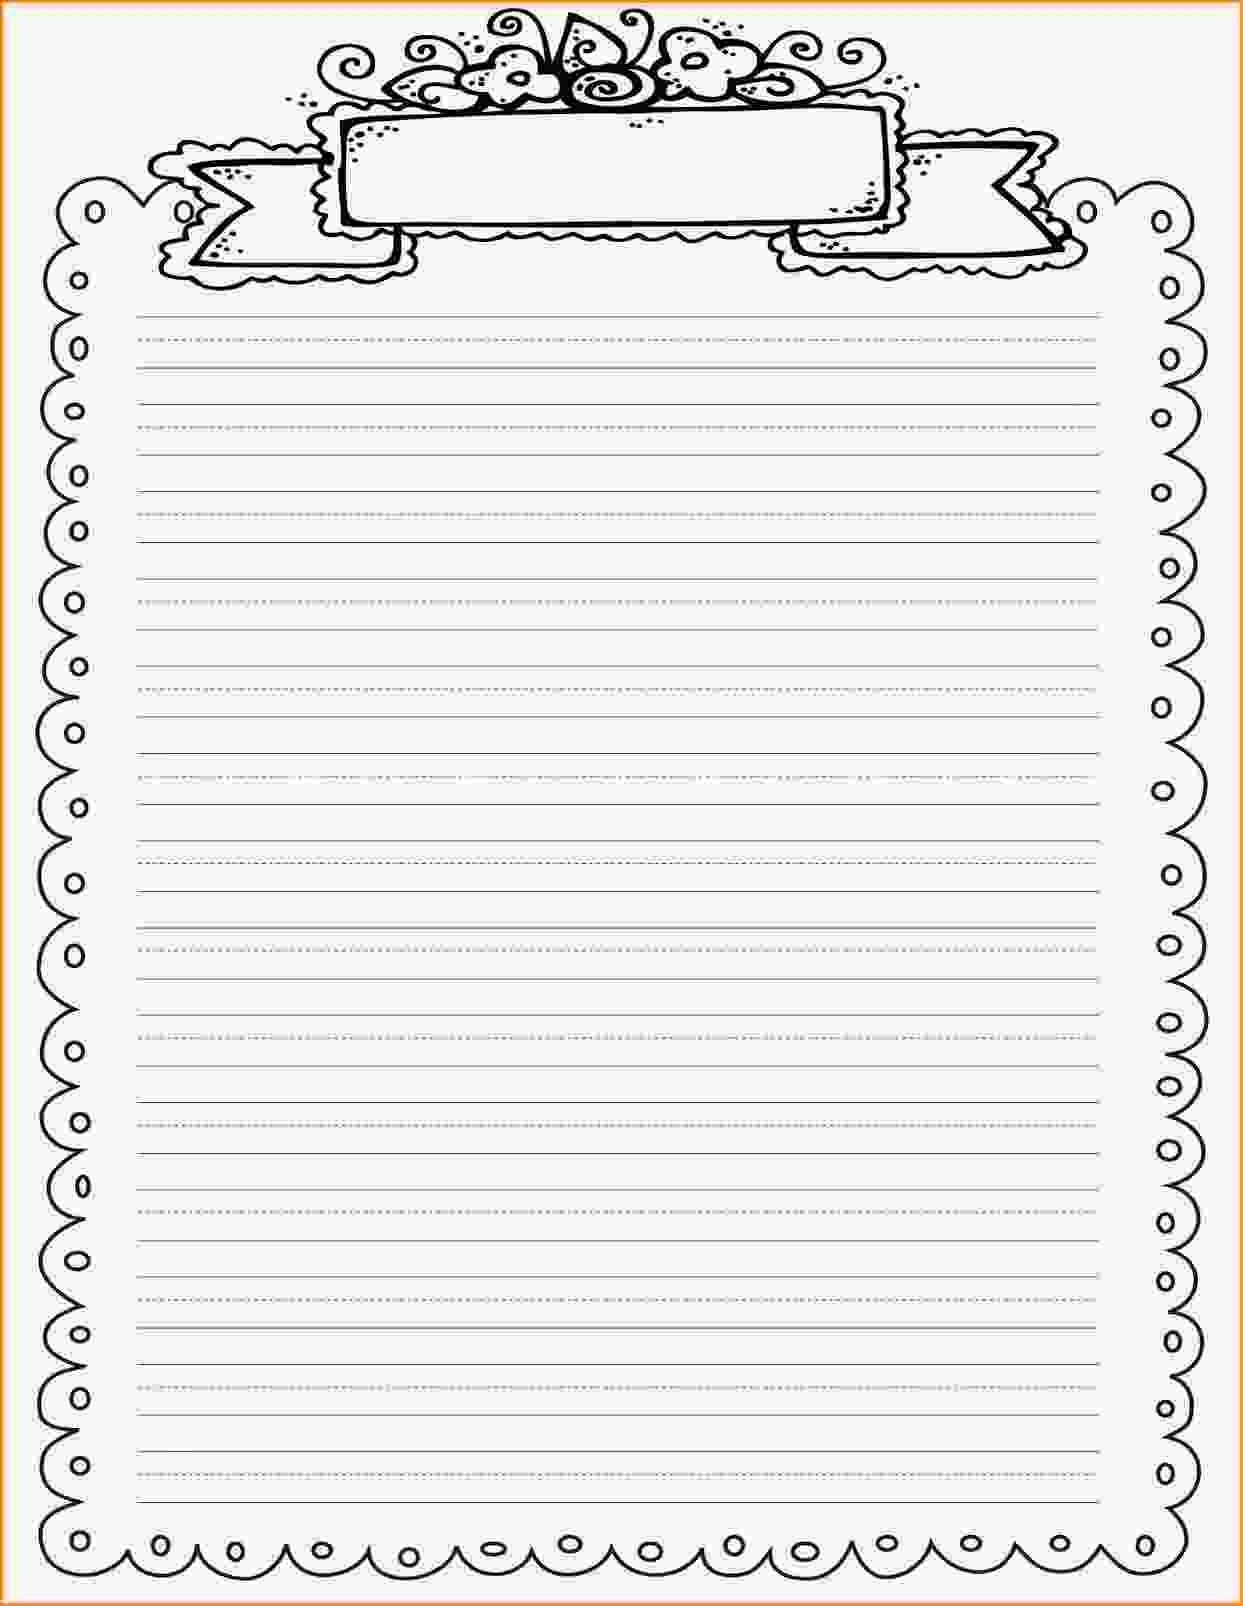 Lined Paper Printable With Border World Of Printables 